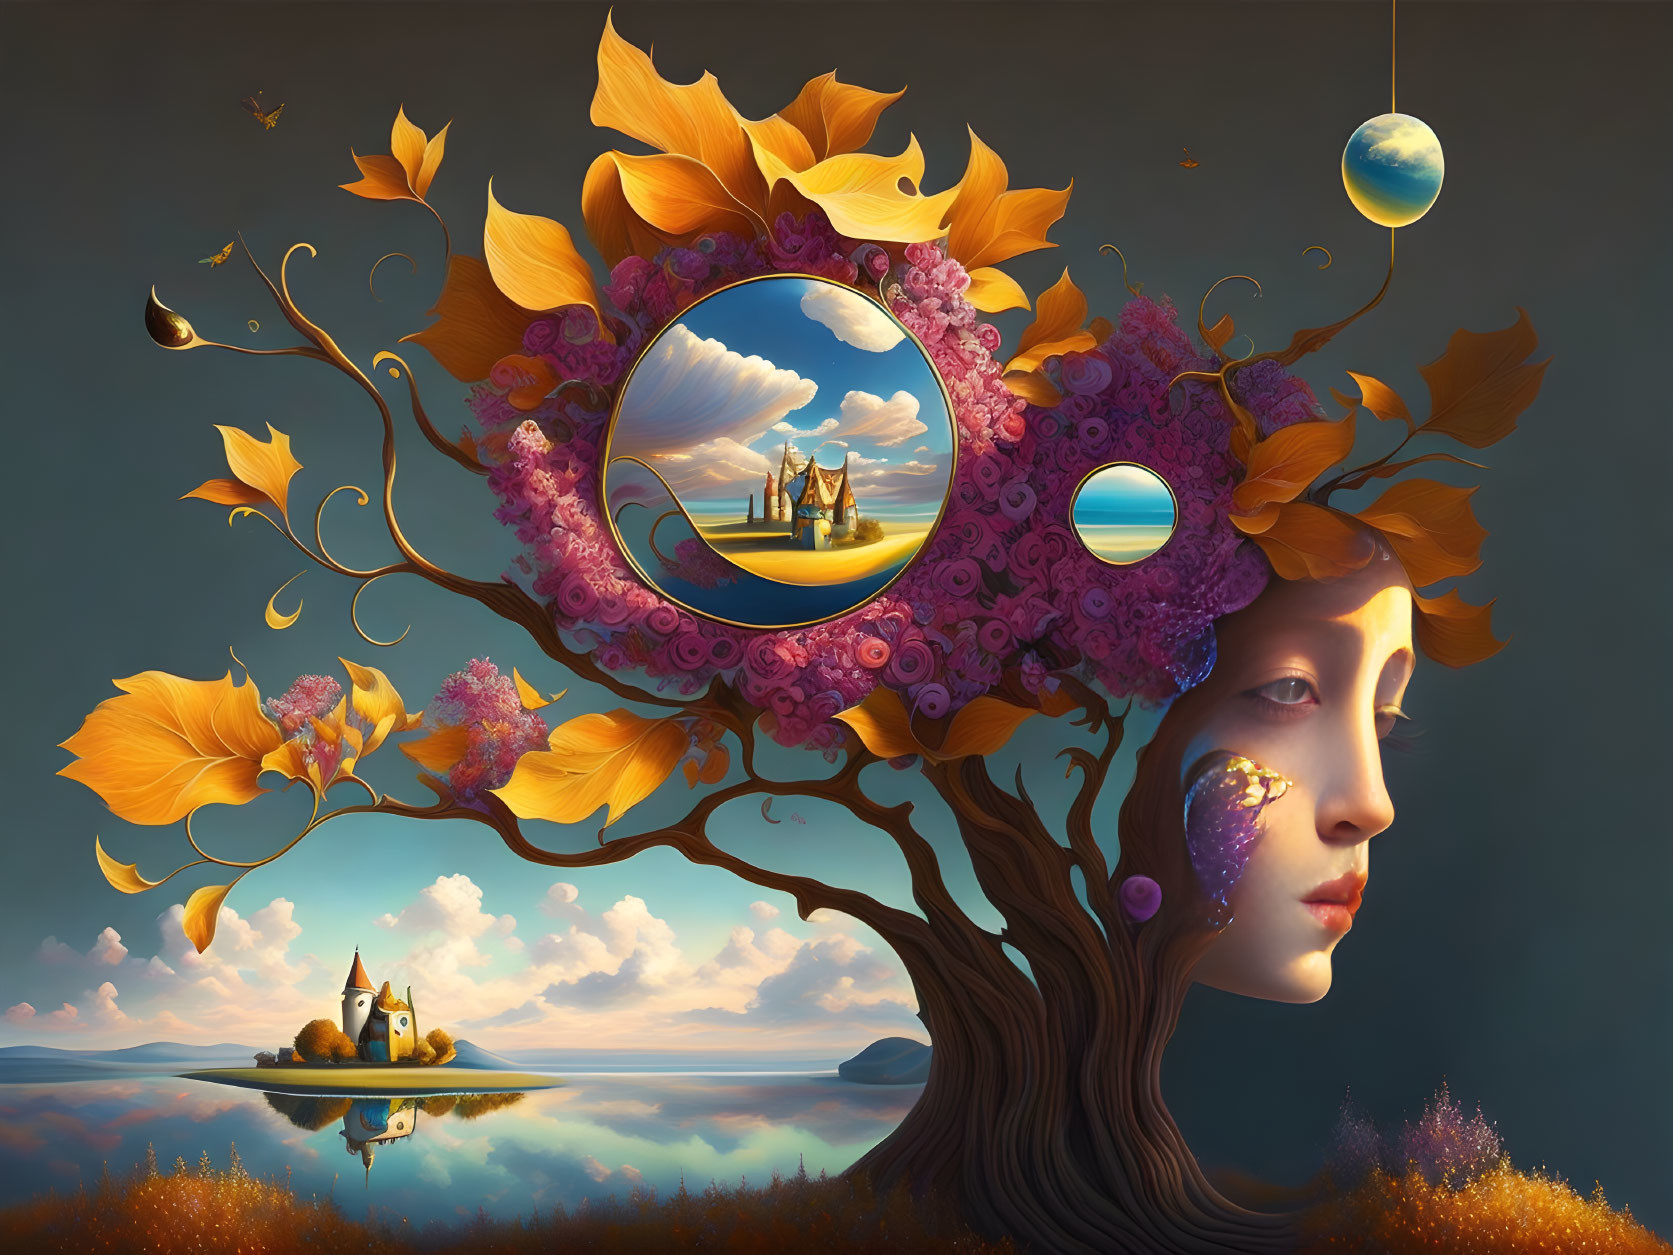 Surreal artwork: Woman's face merges with tree, adorned with colorful leaves, flowers, and